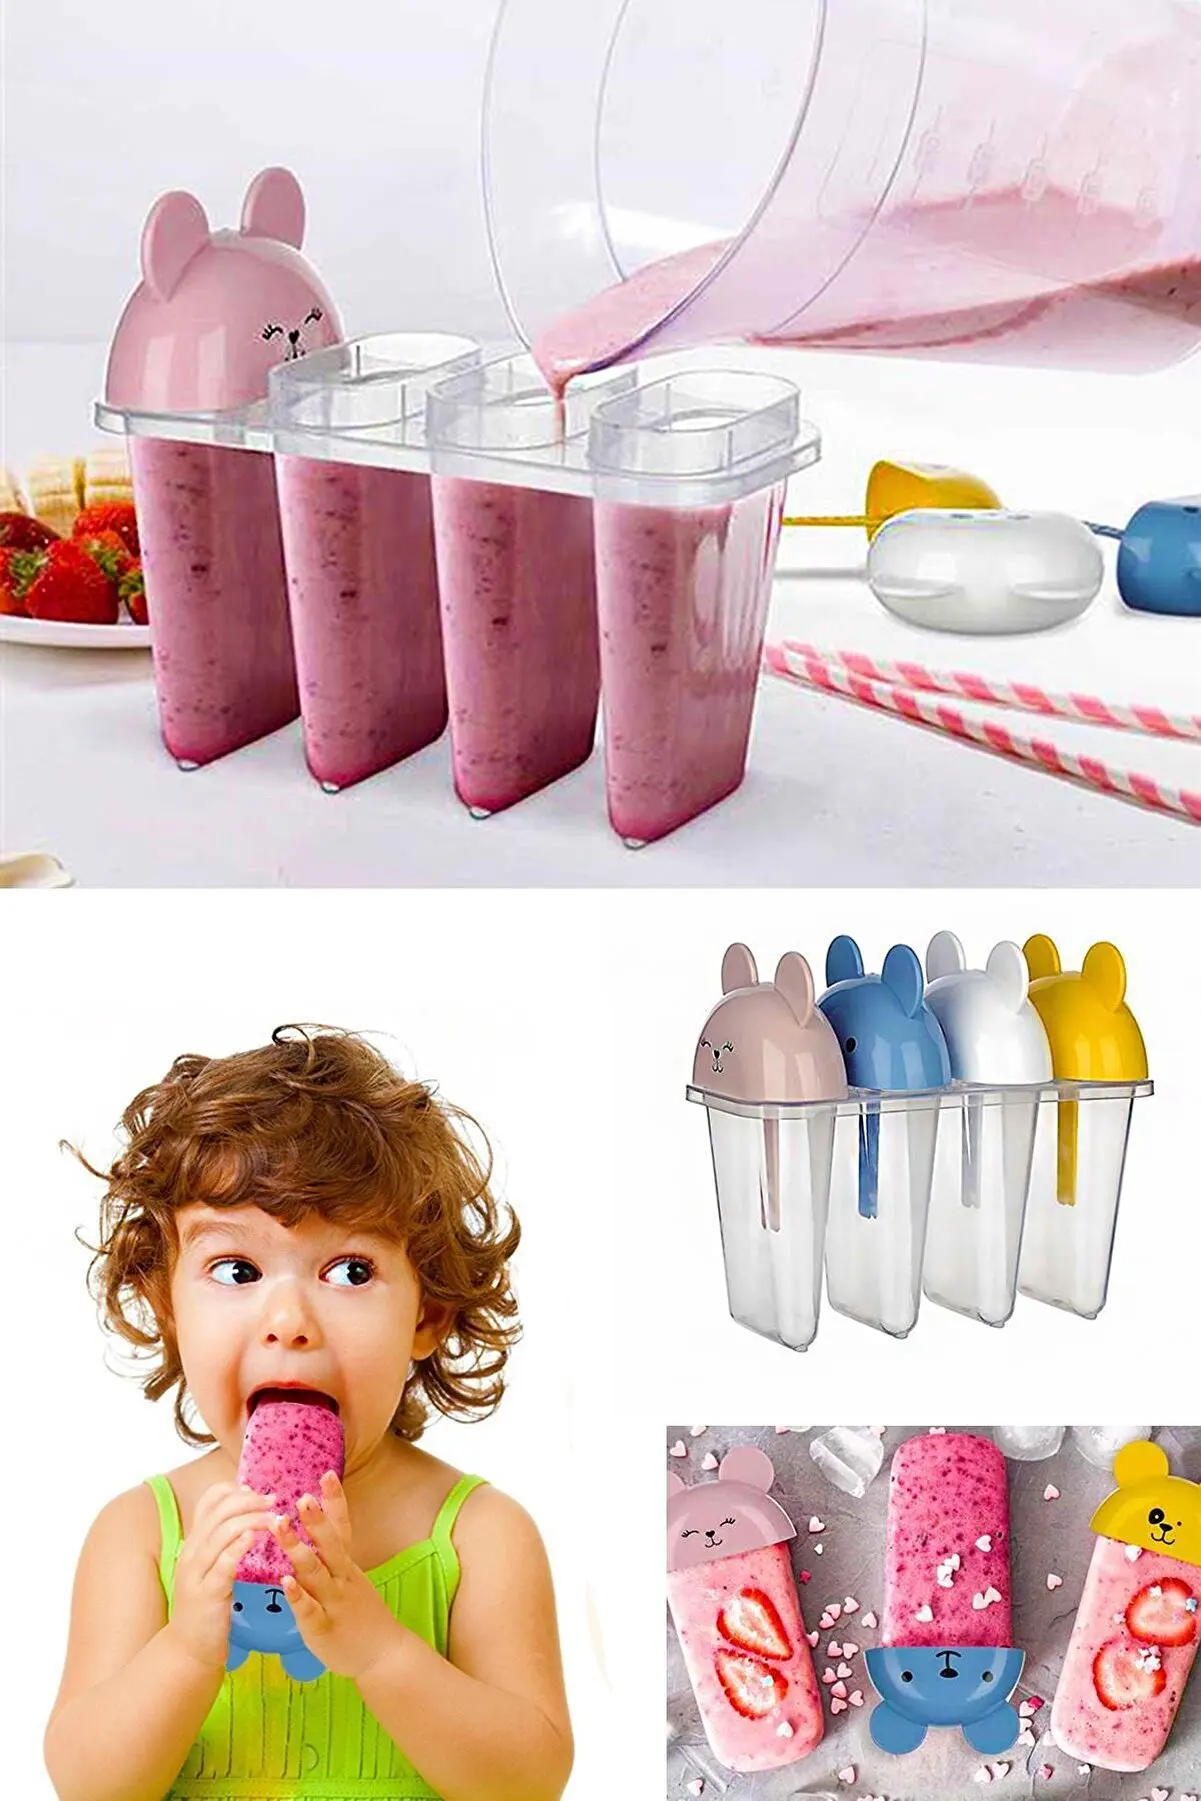 WONDERFUL TASTE AND AMAZING Home Practical Ice Cream Mold Fruit Juice Container  Gift   FREE SHIPPING